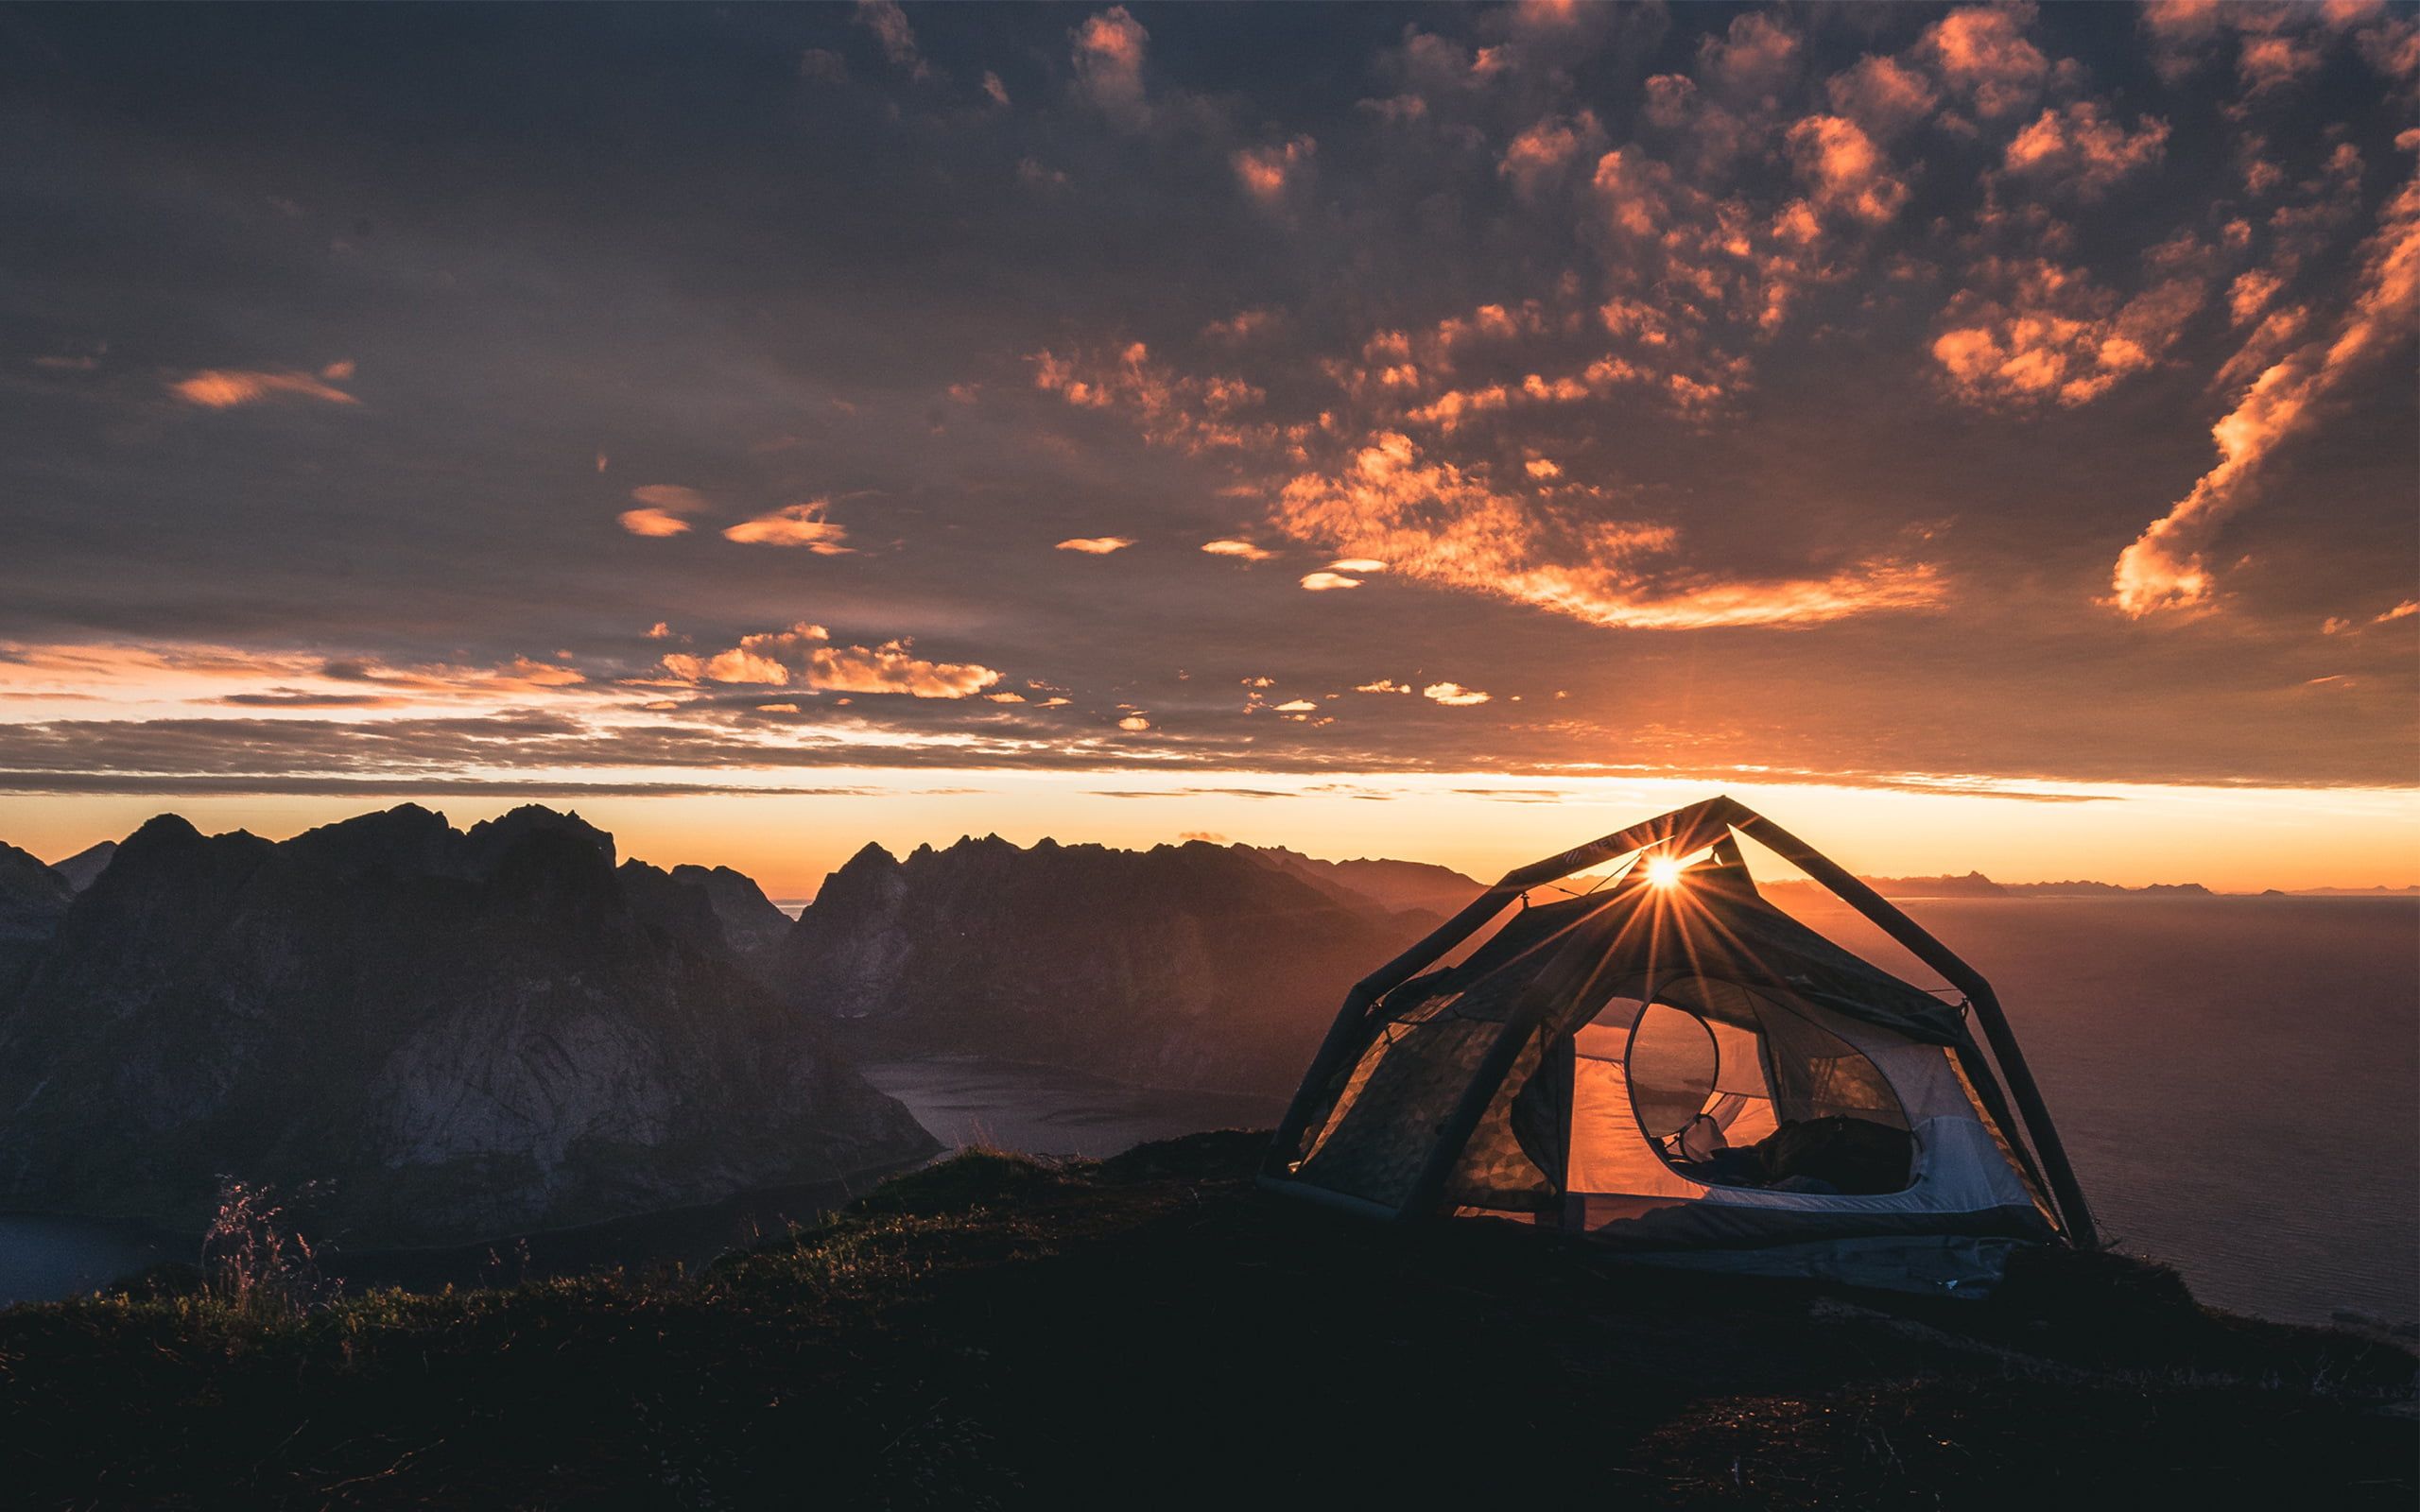 Black and white dome ten tent camping mountains landscape sunset photography sun rays k wallpaper hdwallpaâ camping photography camping wallpaper tent